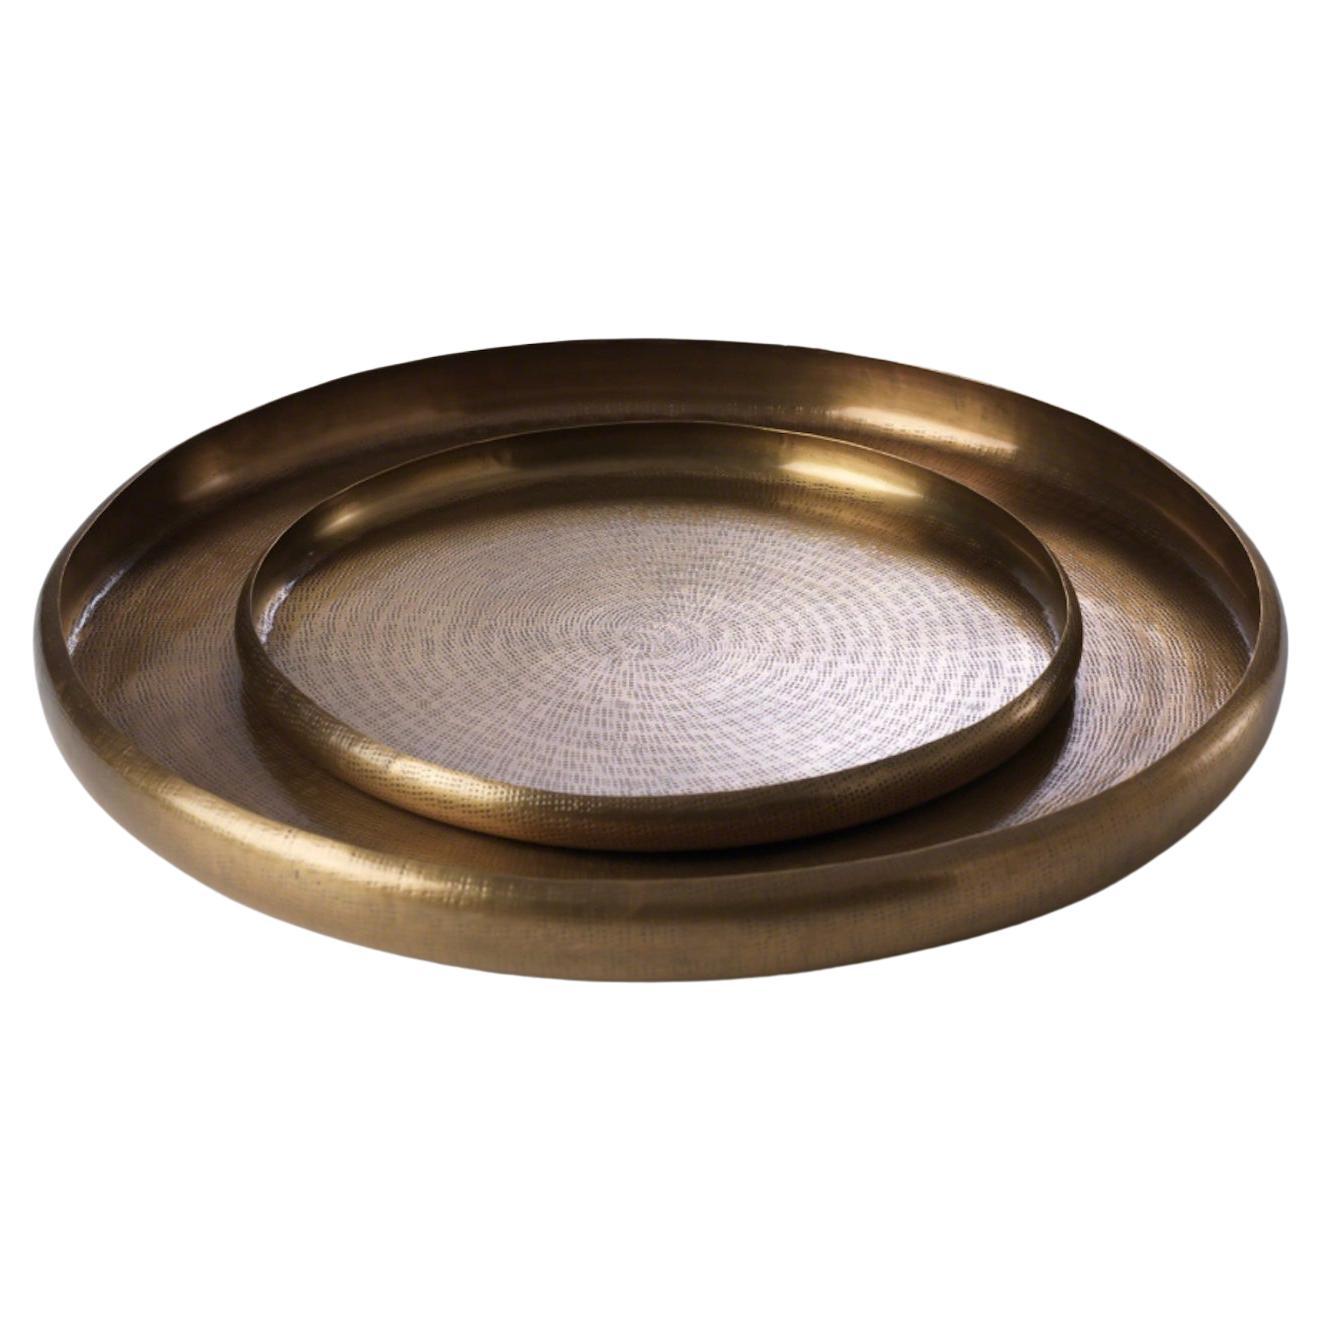 American Large Brass Hand-Embossed Offering Tray